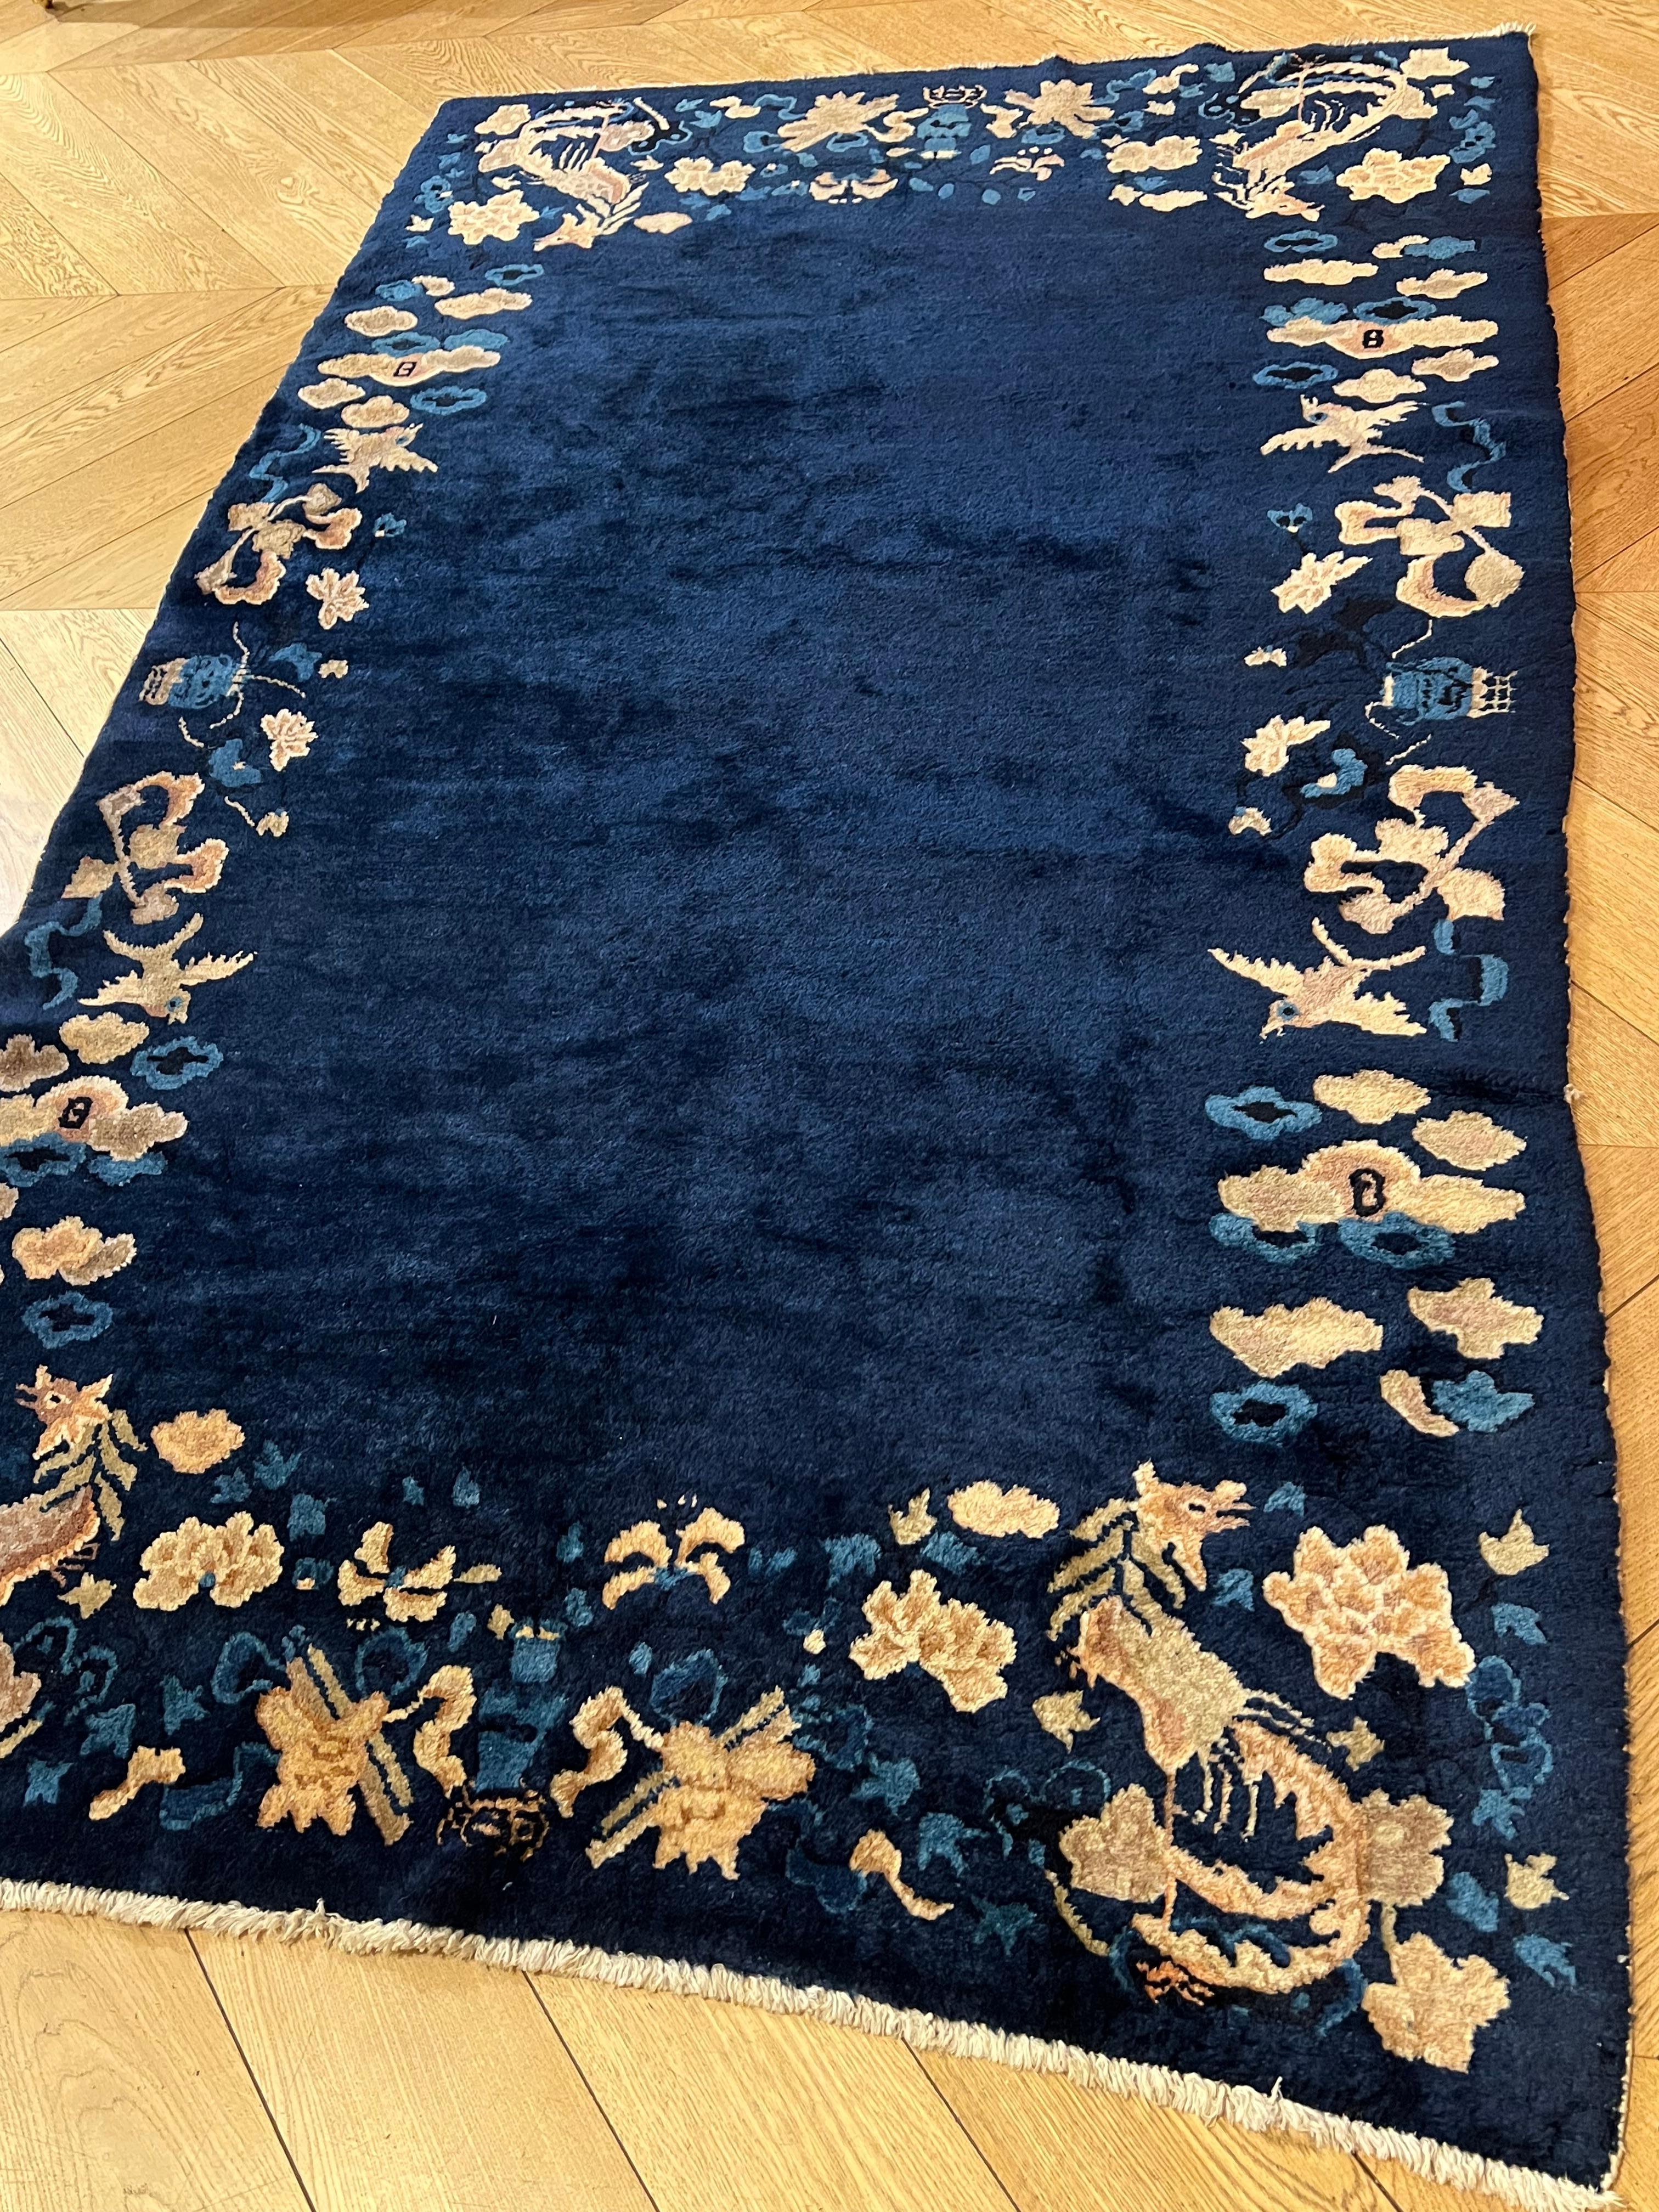 Refined Chinese rug of small size, characterized by a full blue field surrounded by a rich border decorated with flower pots and birds of various shapes. The dominant theme of the decoration is the phoenix placed on the four sides: 
At the